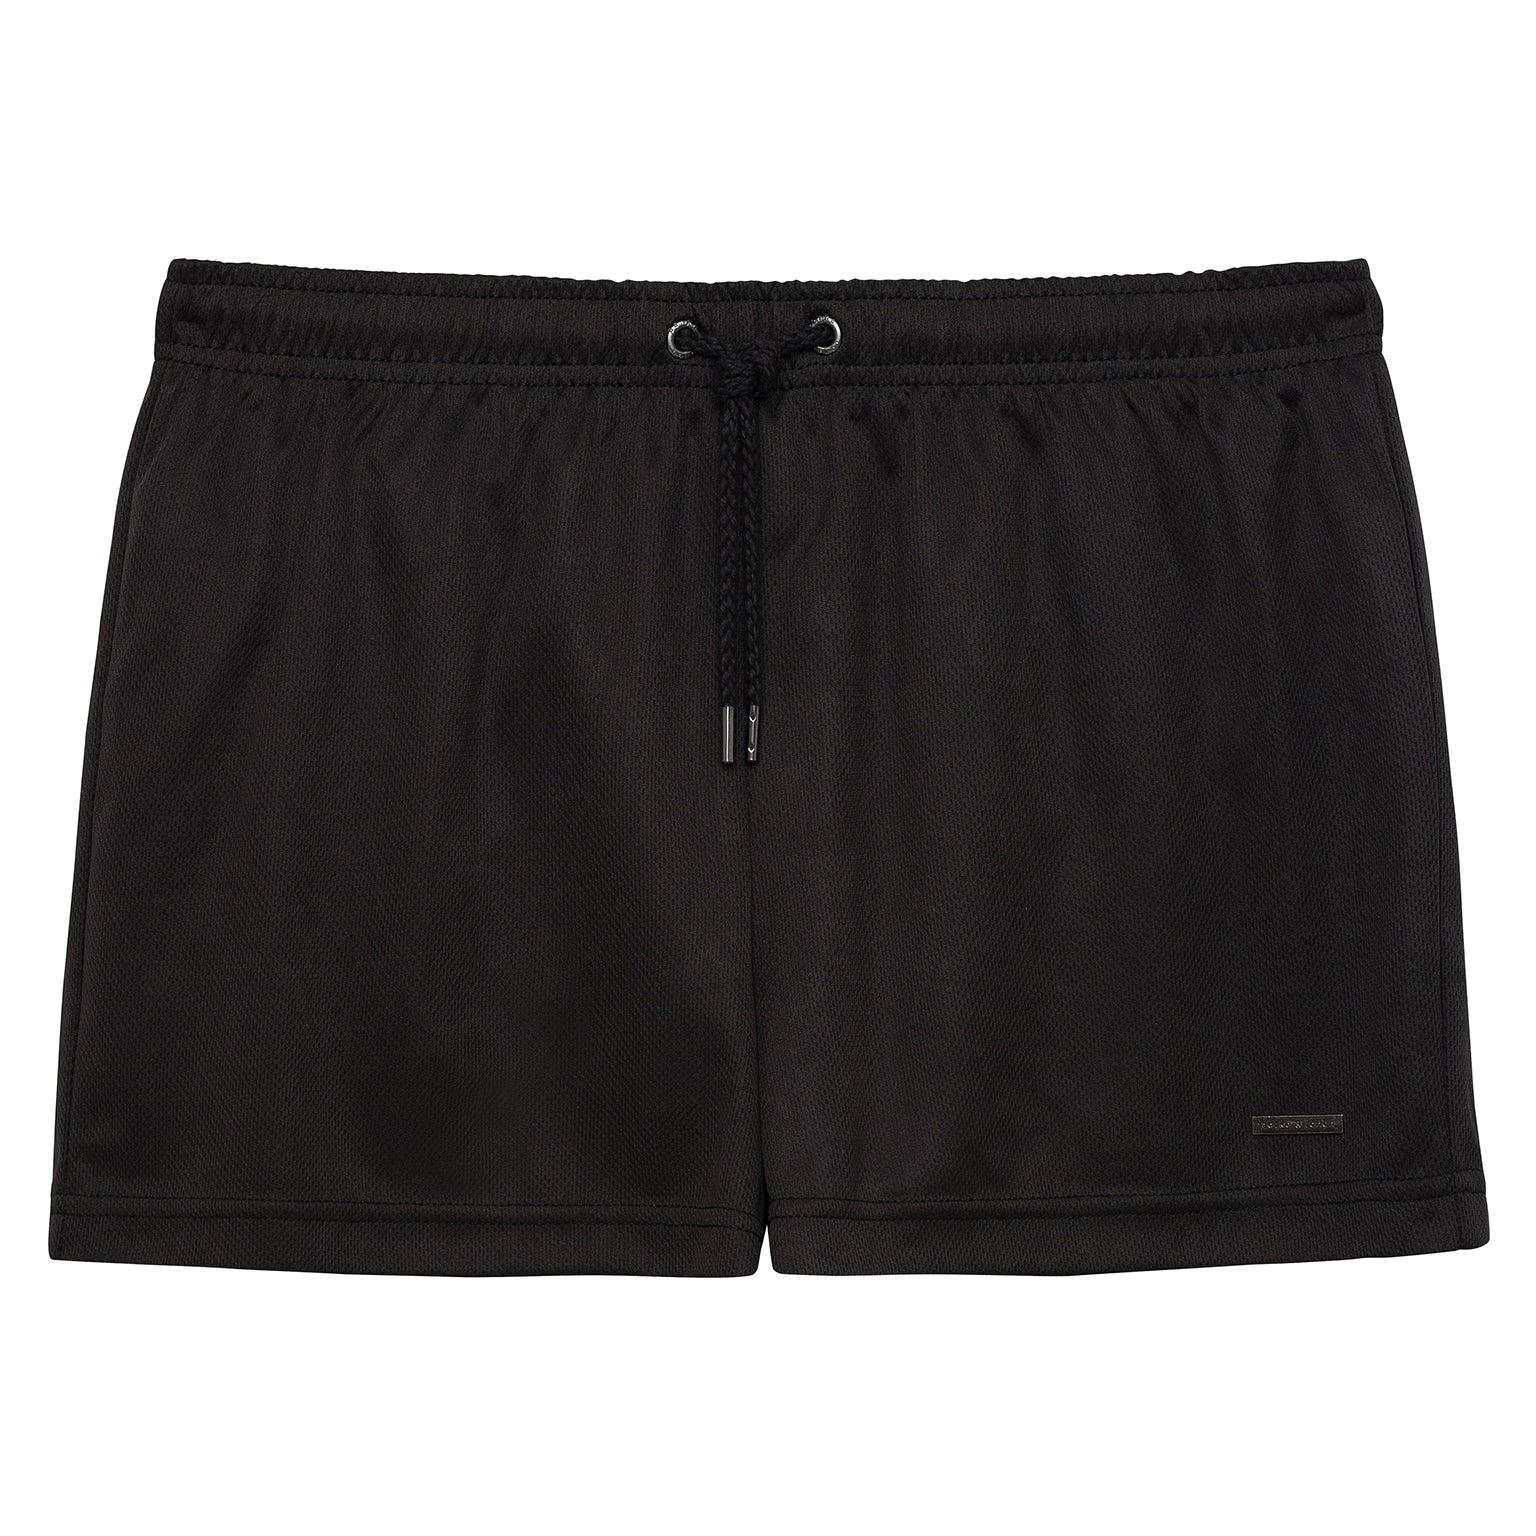 Black 3" Solid P-Town Short